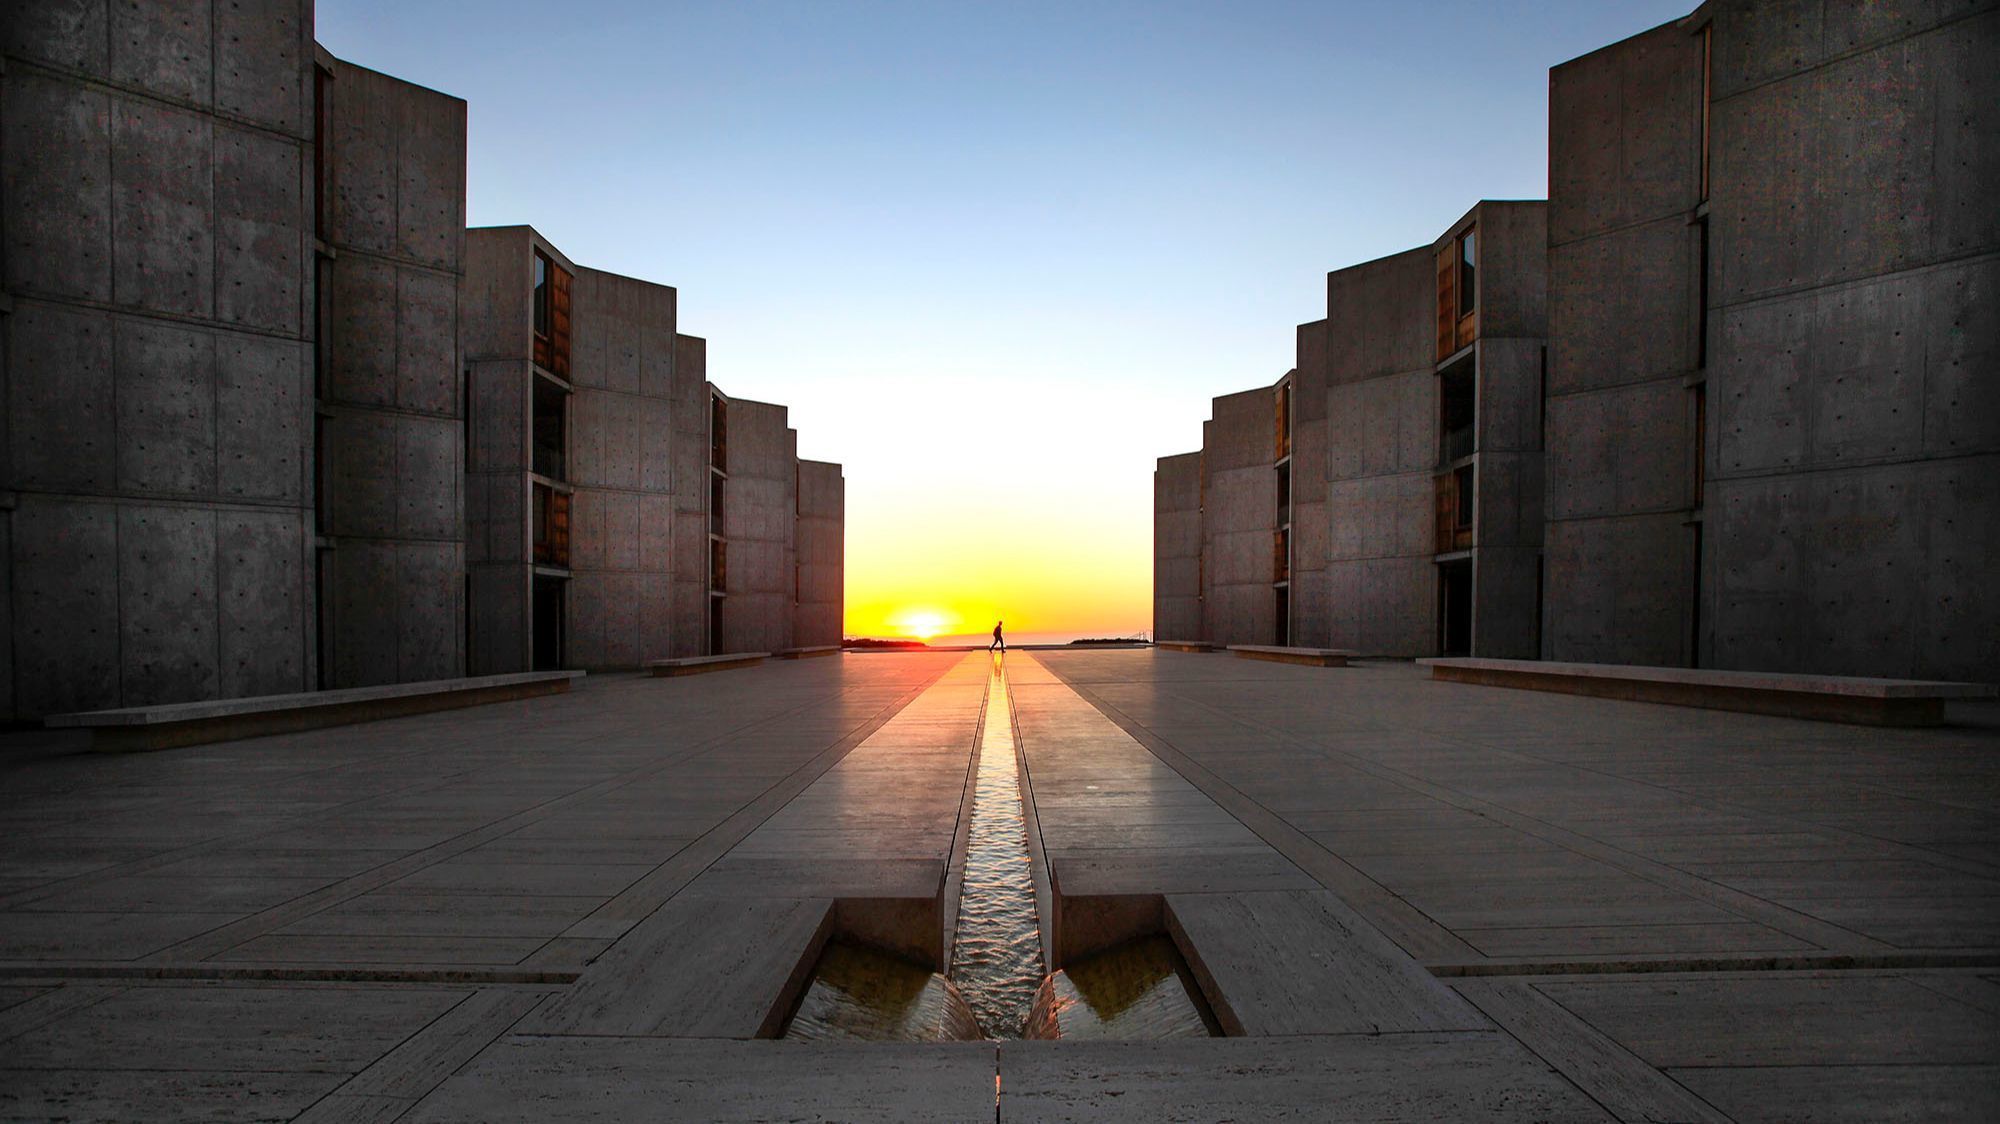 San Diego Museum of Art captures the majesty of architect Louis Kahn's